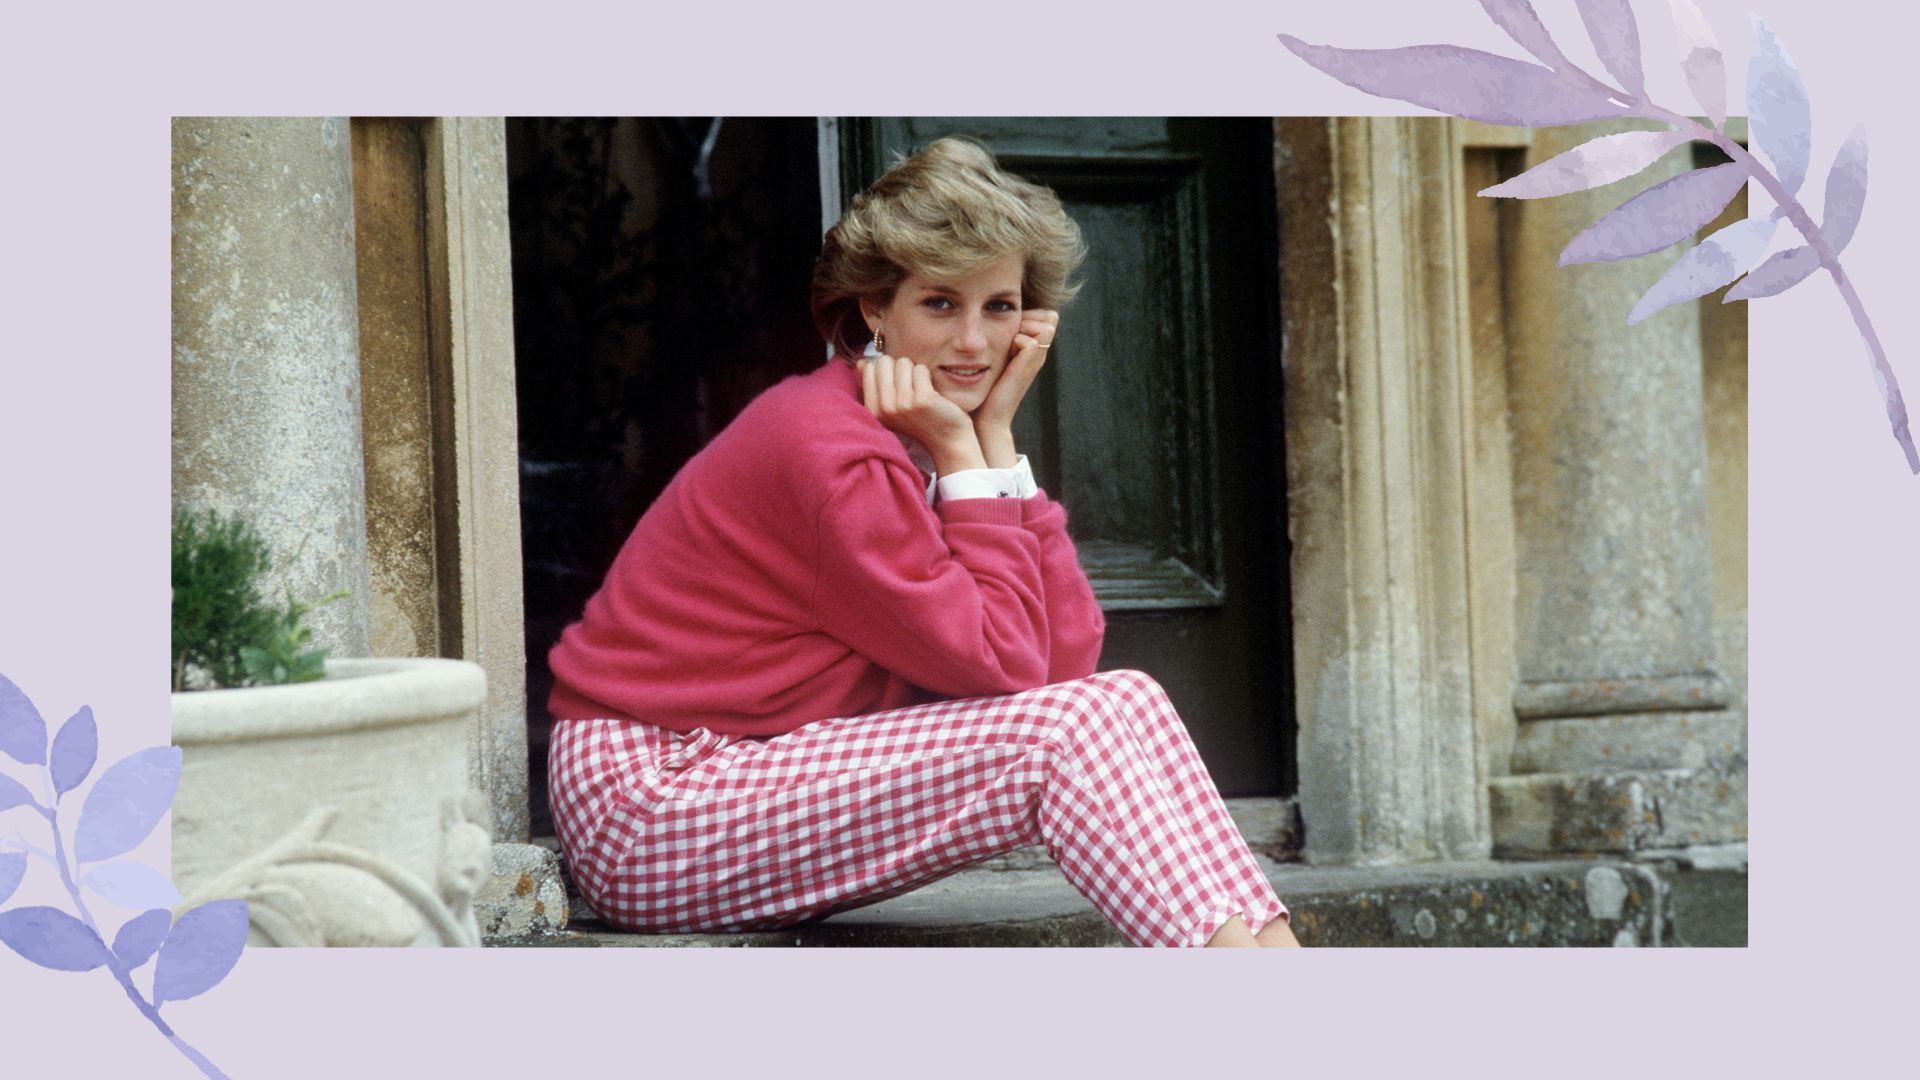 <p>                     <strong>So many things come to mind when we think of Princess Diana's best moments. From her unwavering compassion to her quick wit, there's no surprise that the Princess is remembered with such fondness.</strong>                   </p>                                      <p>                     It's her unwavering commitment to her philanthropic endeavours, rebellious nature and maternal instincts that left an impact on people. Despite her life being cut tragically short, there is no shortage of funny, admirable and impressive moments to remember her for.                   </p>                                      <p>                     These are the most memorable moments that defined the 'people's princess' - from her charity work to off-duty humorous moments.                   </p>